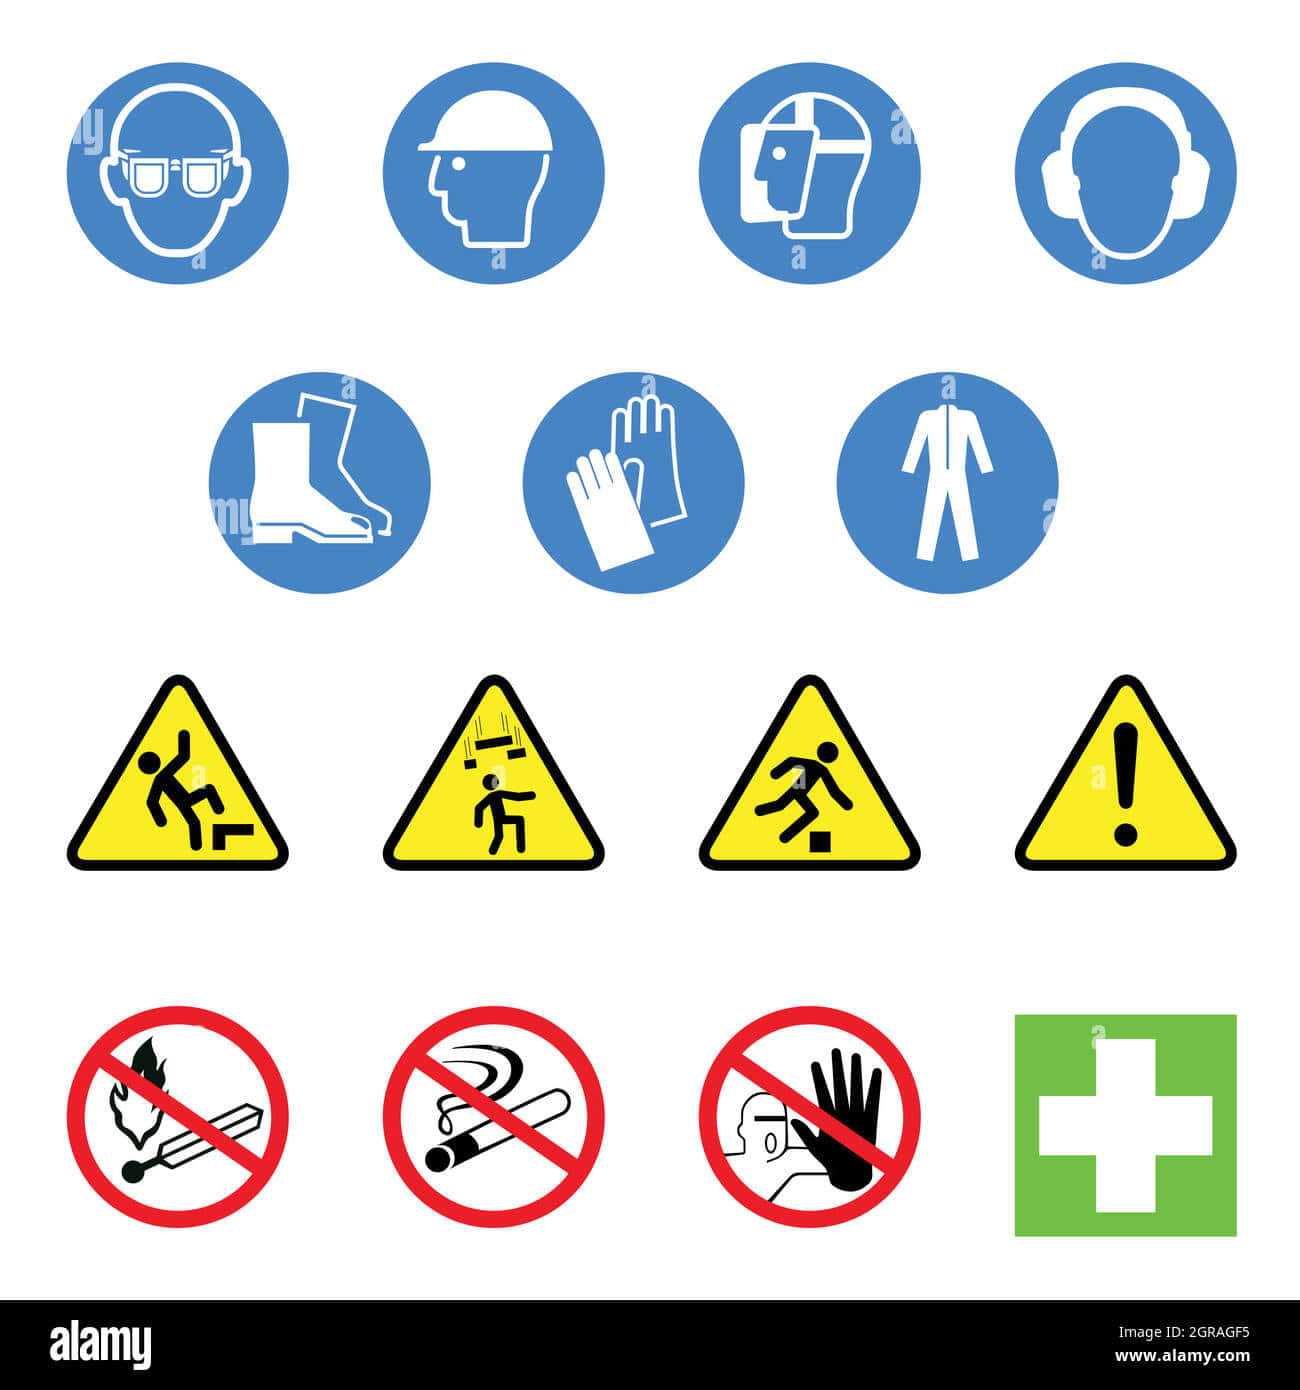 Safety Signs And Symbols - Stock Image